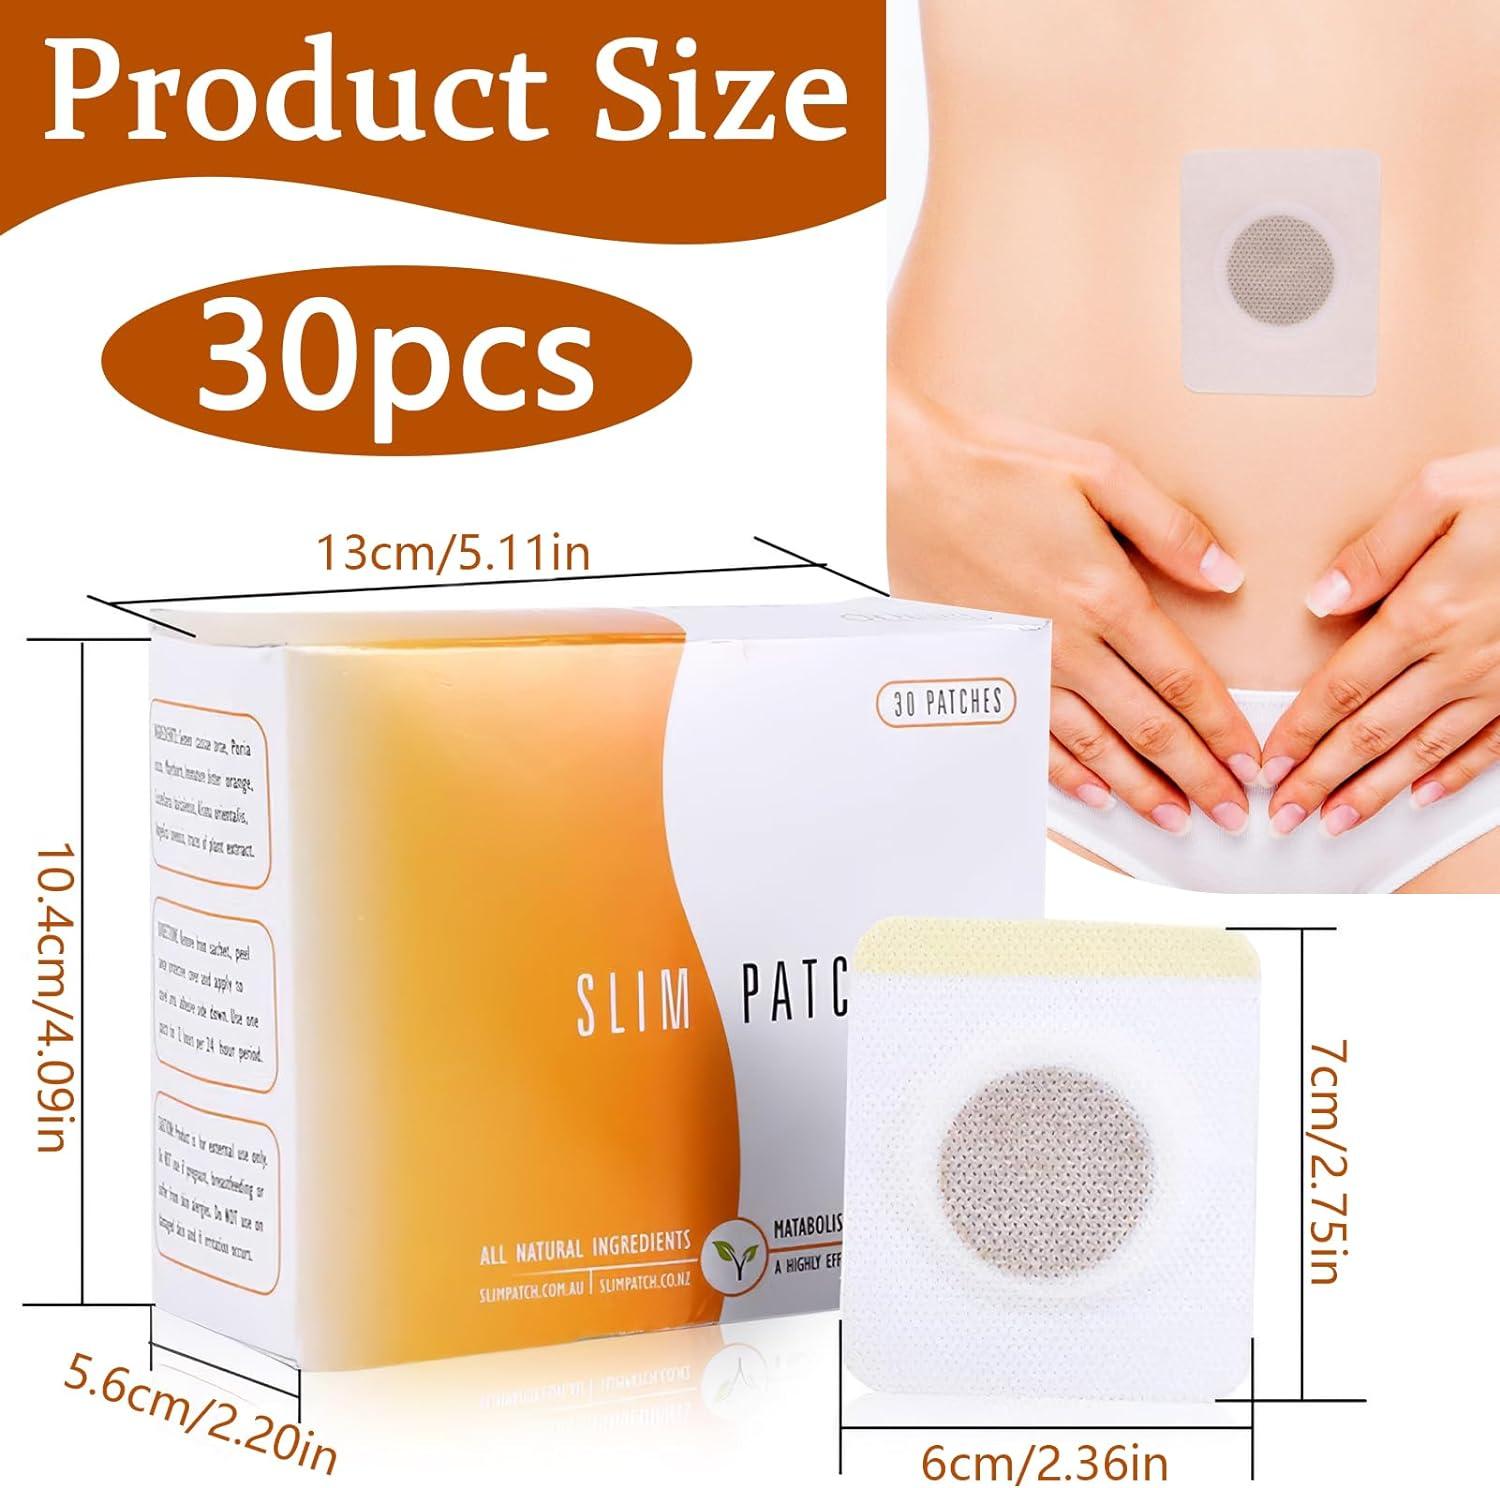 30Pcs/Box Weight Loss Slim Patch Fat Burning Slimming Products Body Belly  Waist Losing Weight Cellulite Fat Burner Slim Sticker